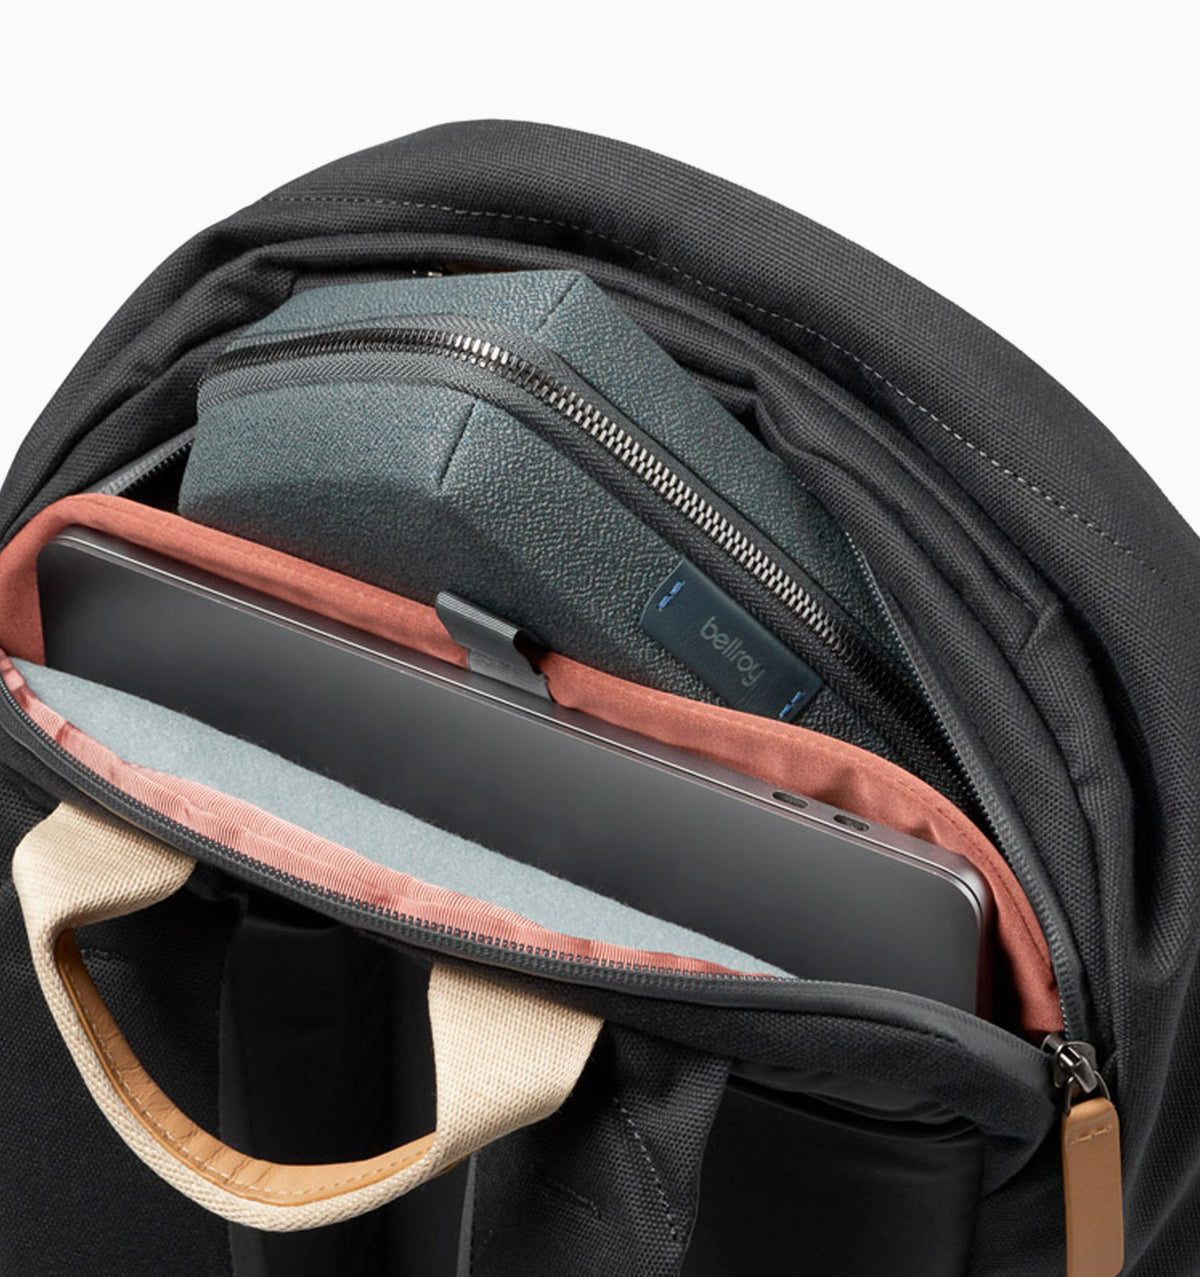 Bellroy Classic Laptop Backpack Plus (Second Edition) - Charcoal